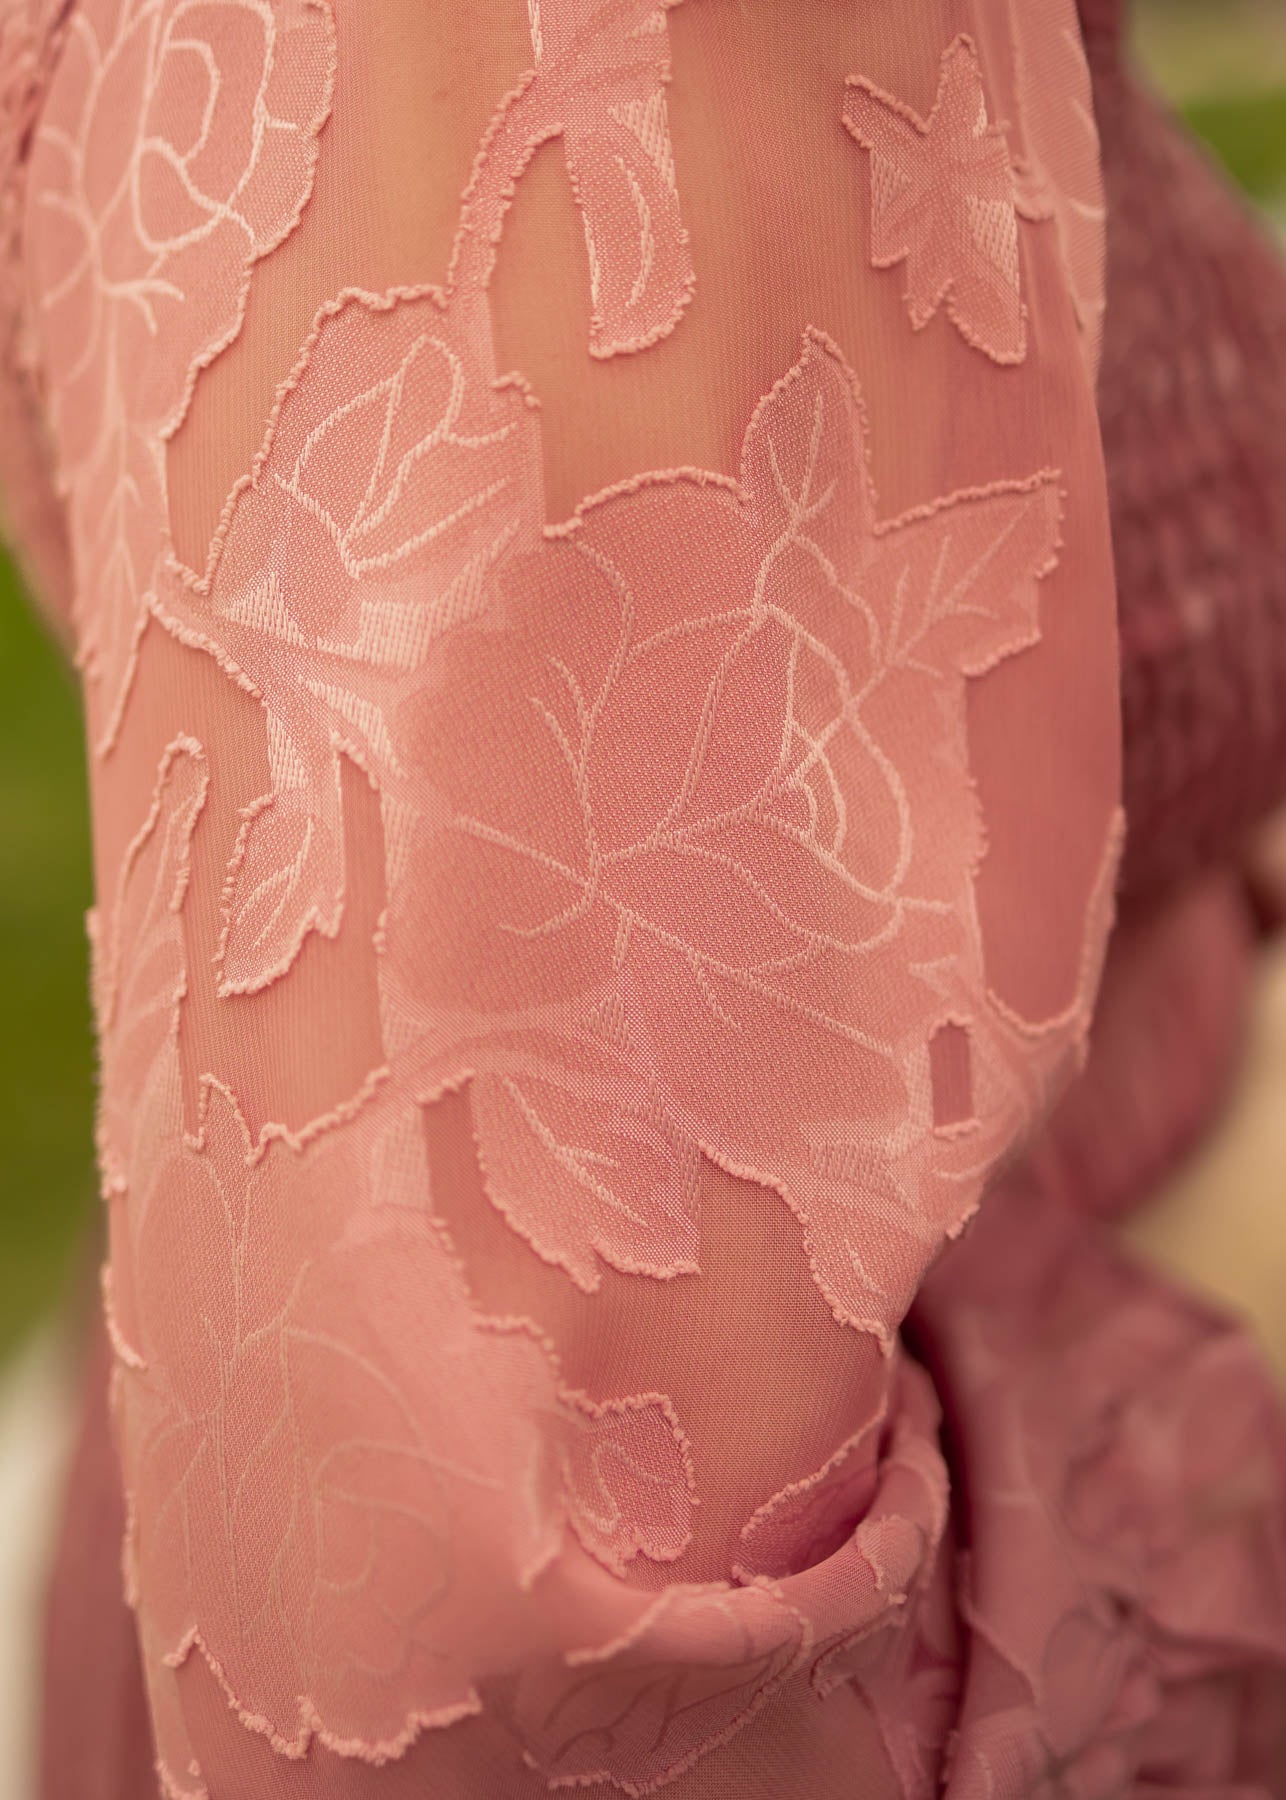 Fabric of a dusty rose dress